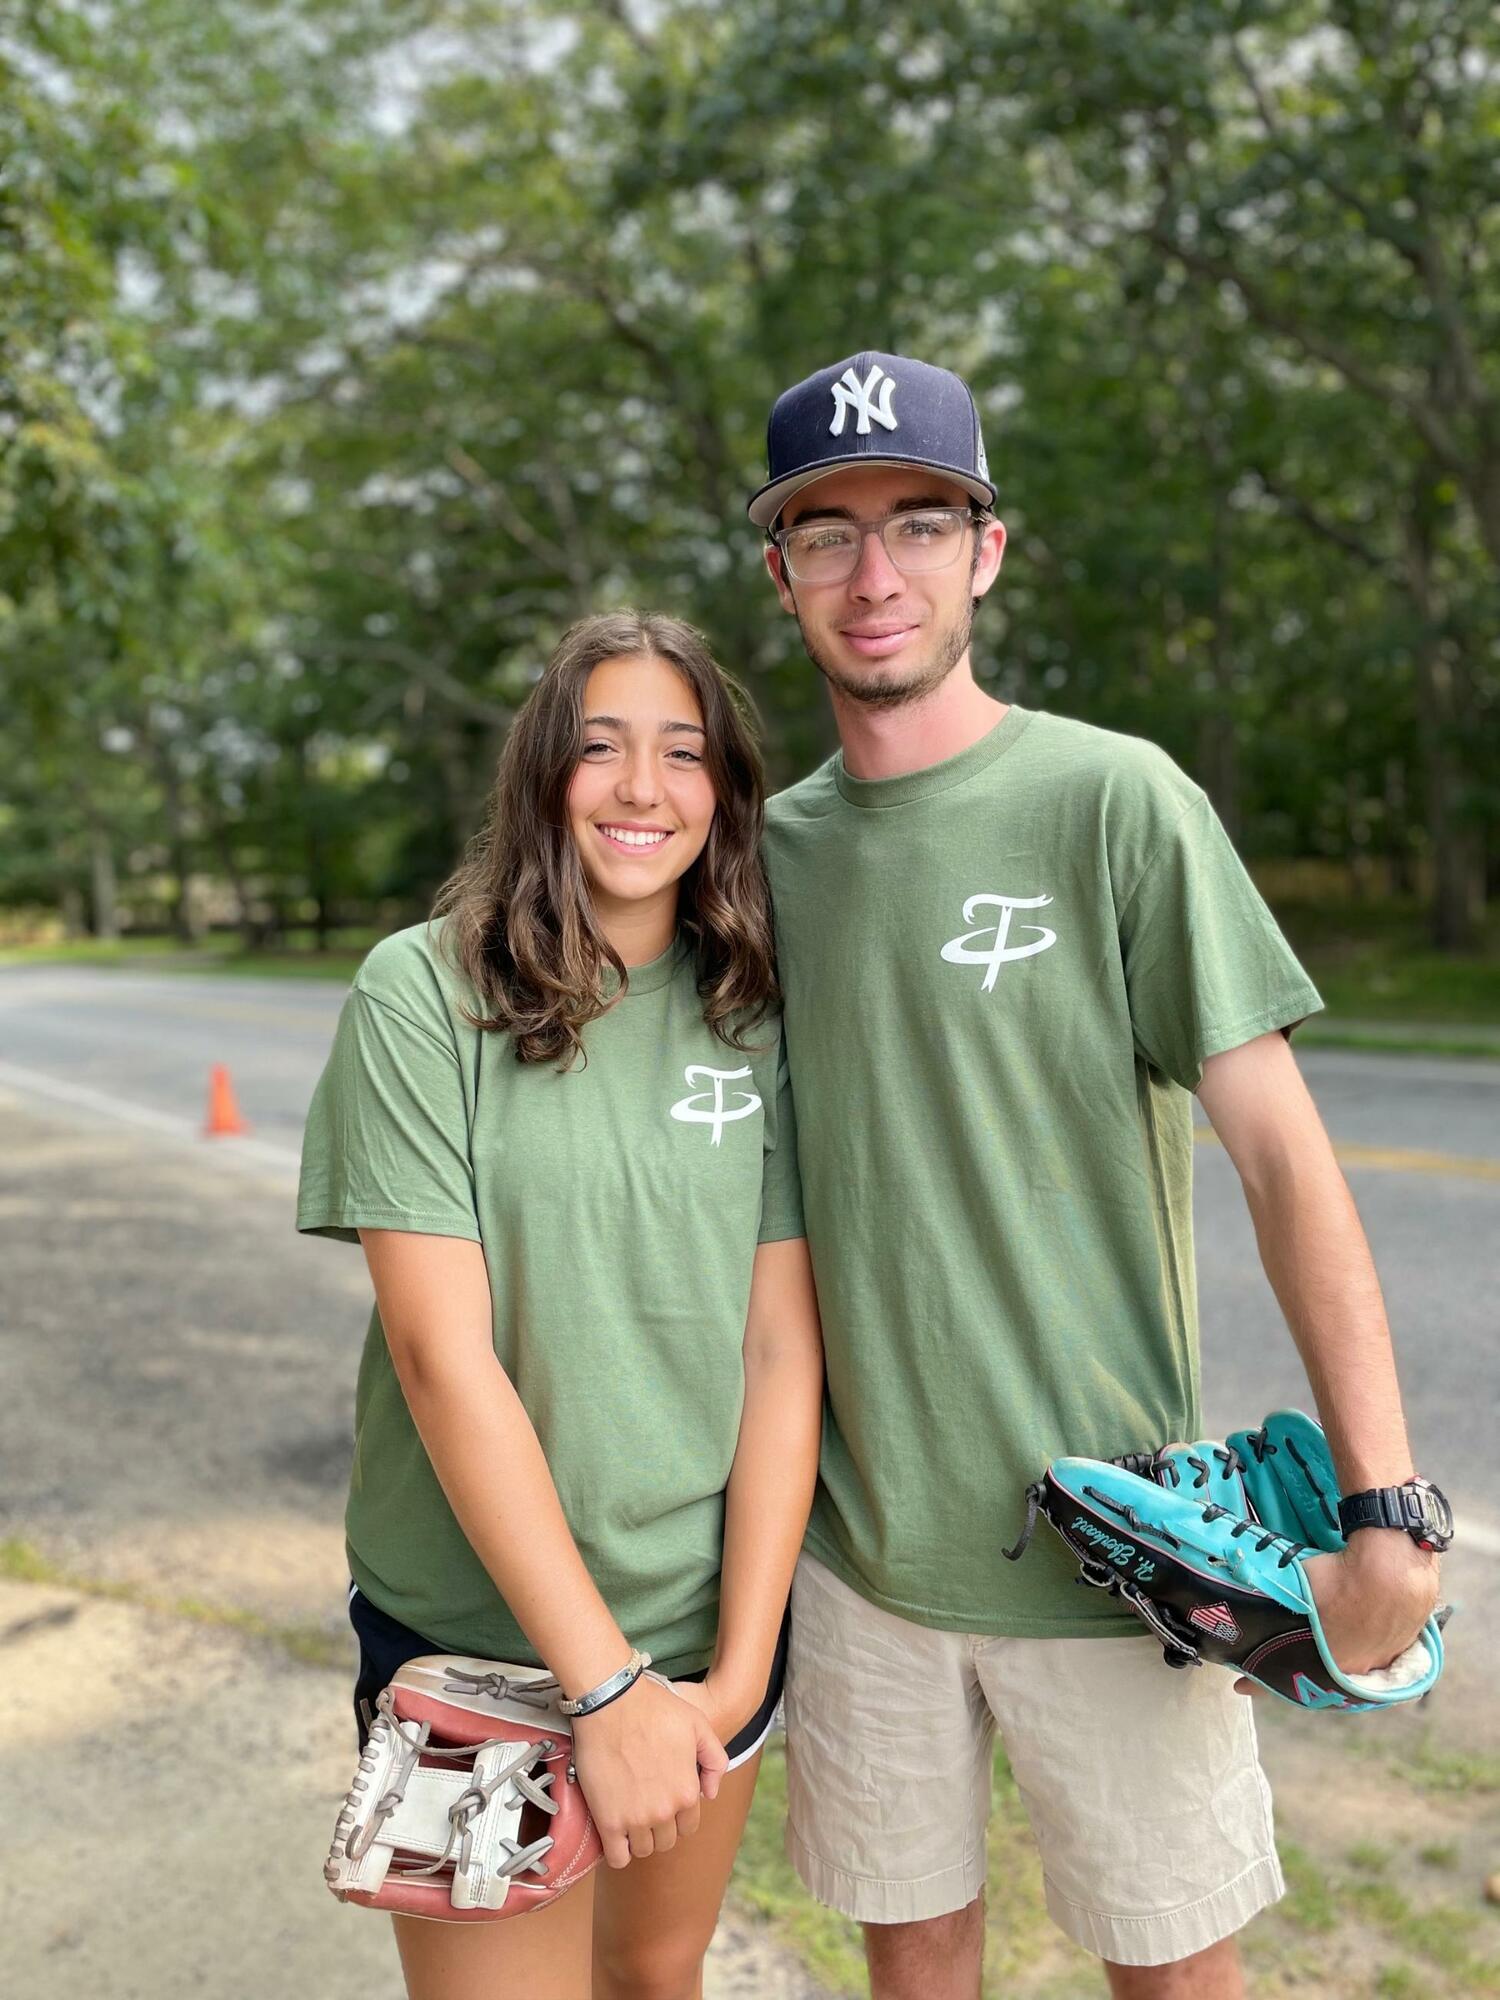 Two of the eight scholarship recipients, Emma Terry and Hunter Eberhart, who threw out the first pitches on opening day of the tournament on Thursday, August 3.